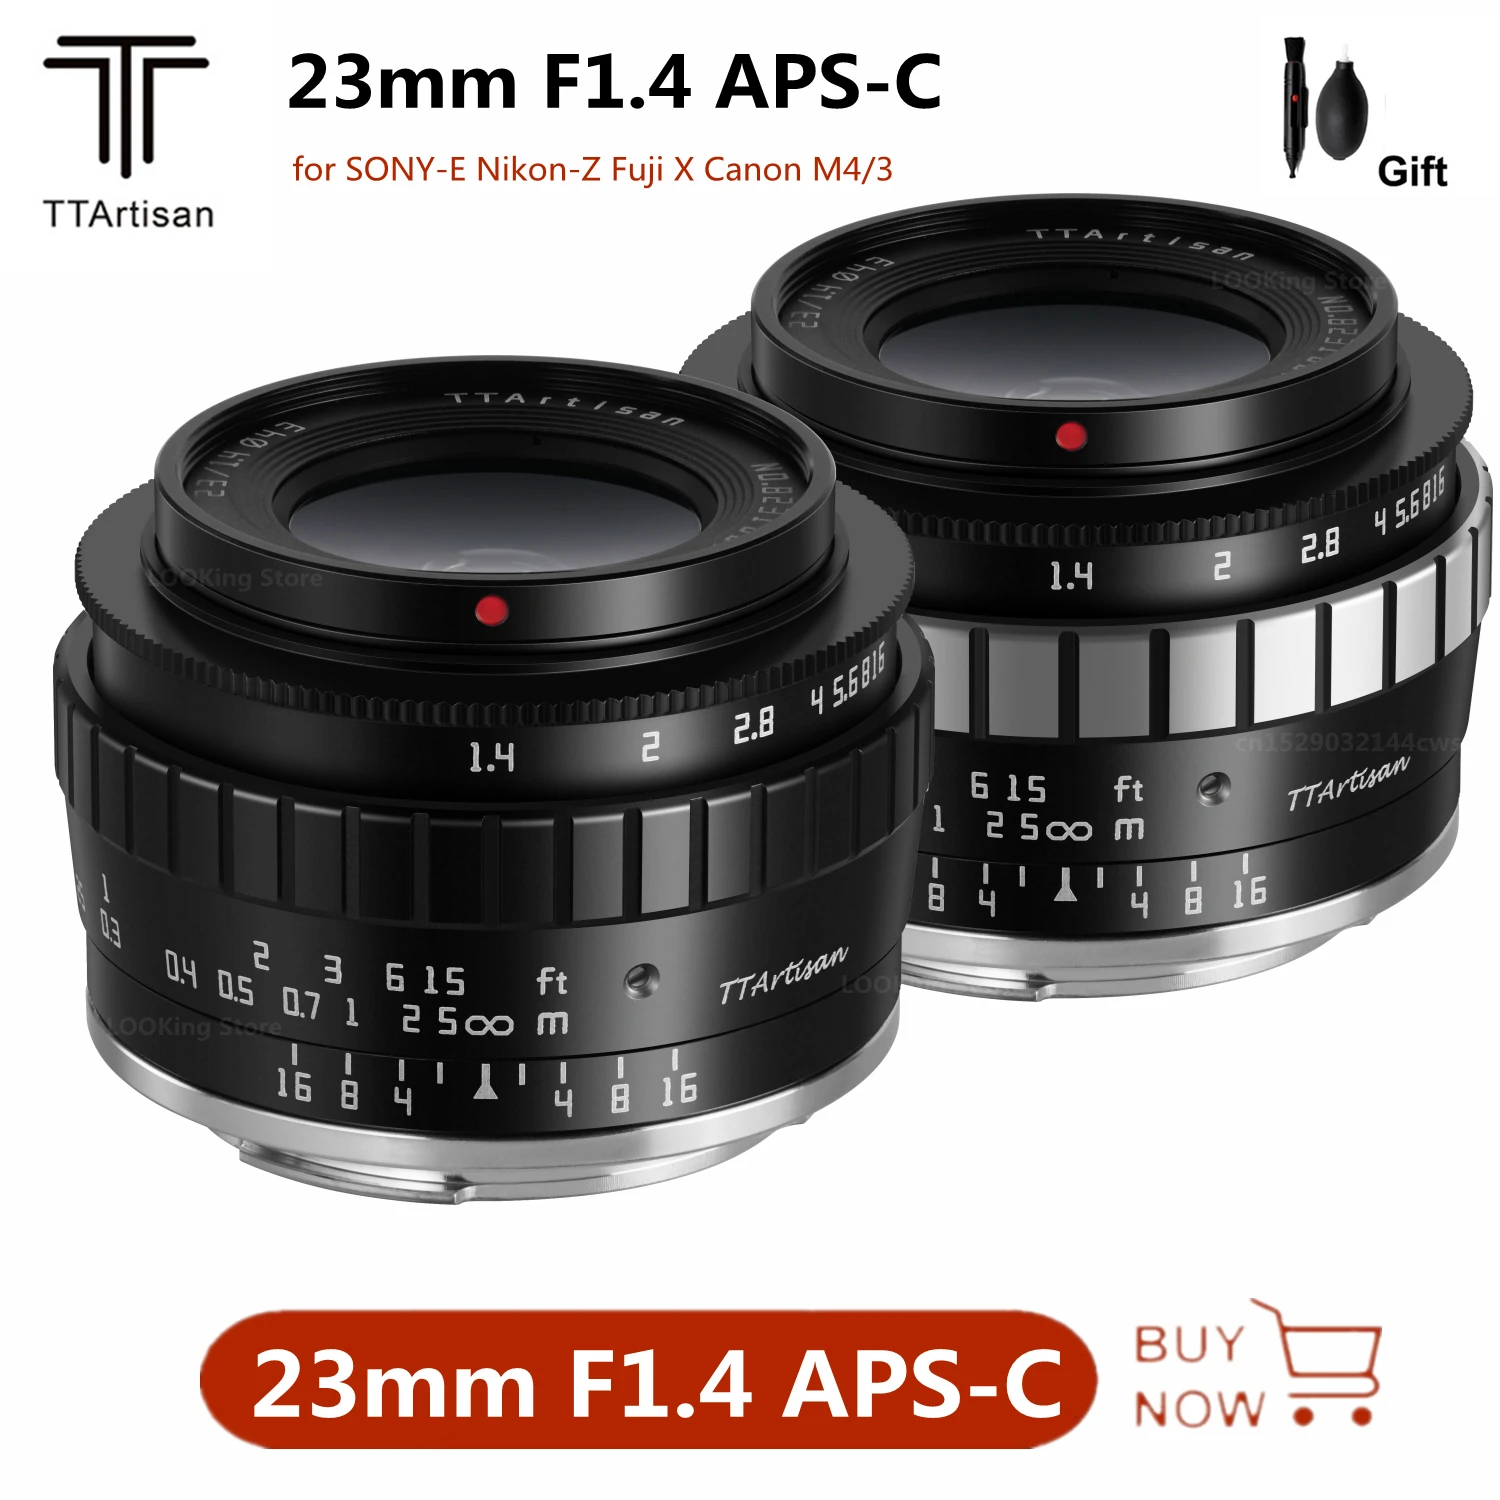 

TTartisan 23mm F1.4 APS-C Lens Manual Wide Angle for Sony E/Fuji X/M4/3/Nikon Z Mount Cameras A6600 A6500 X-T4 X-T30 GH5 Z6 Zfc